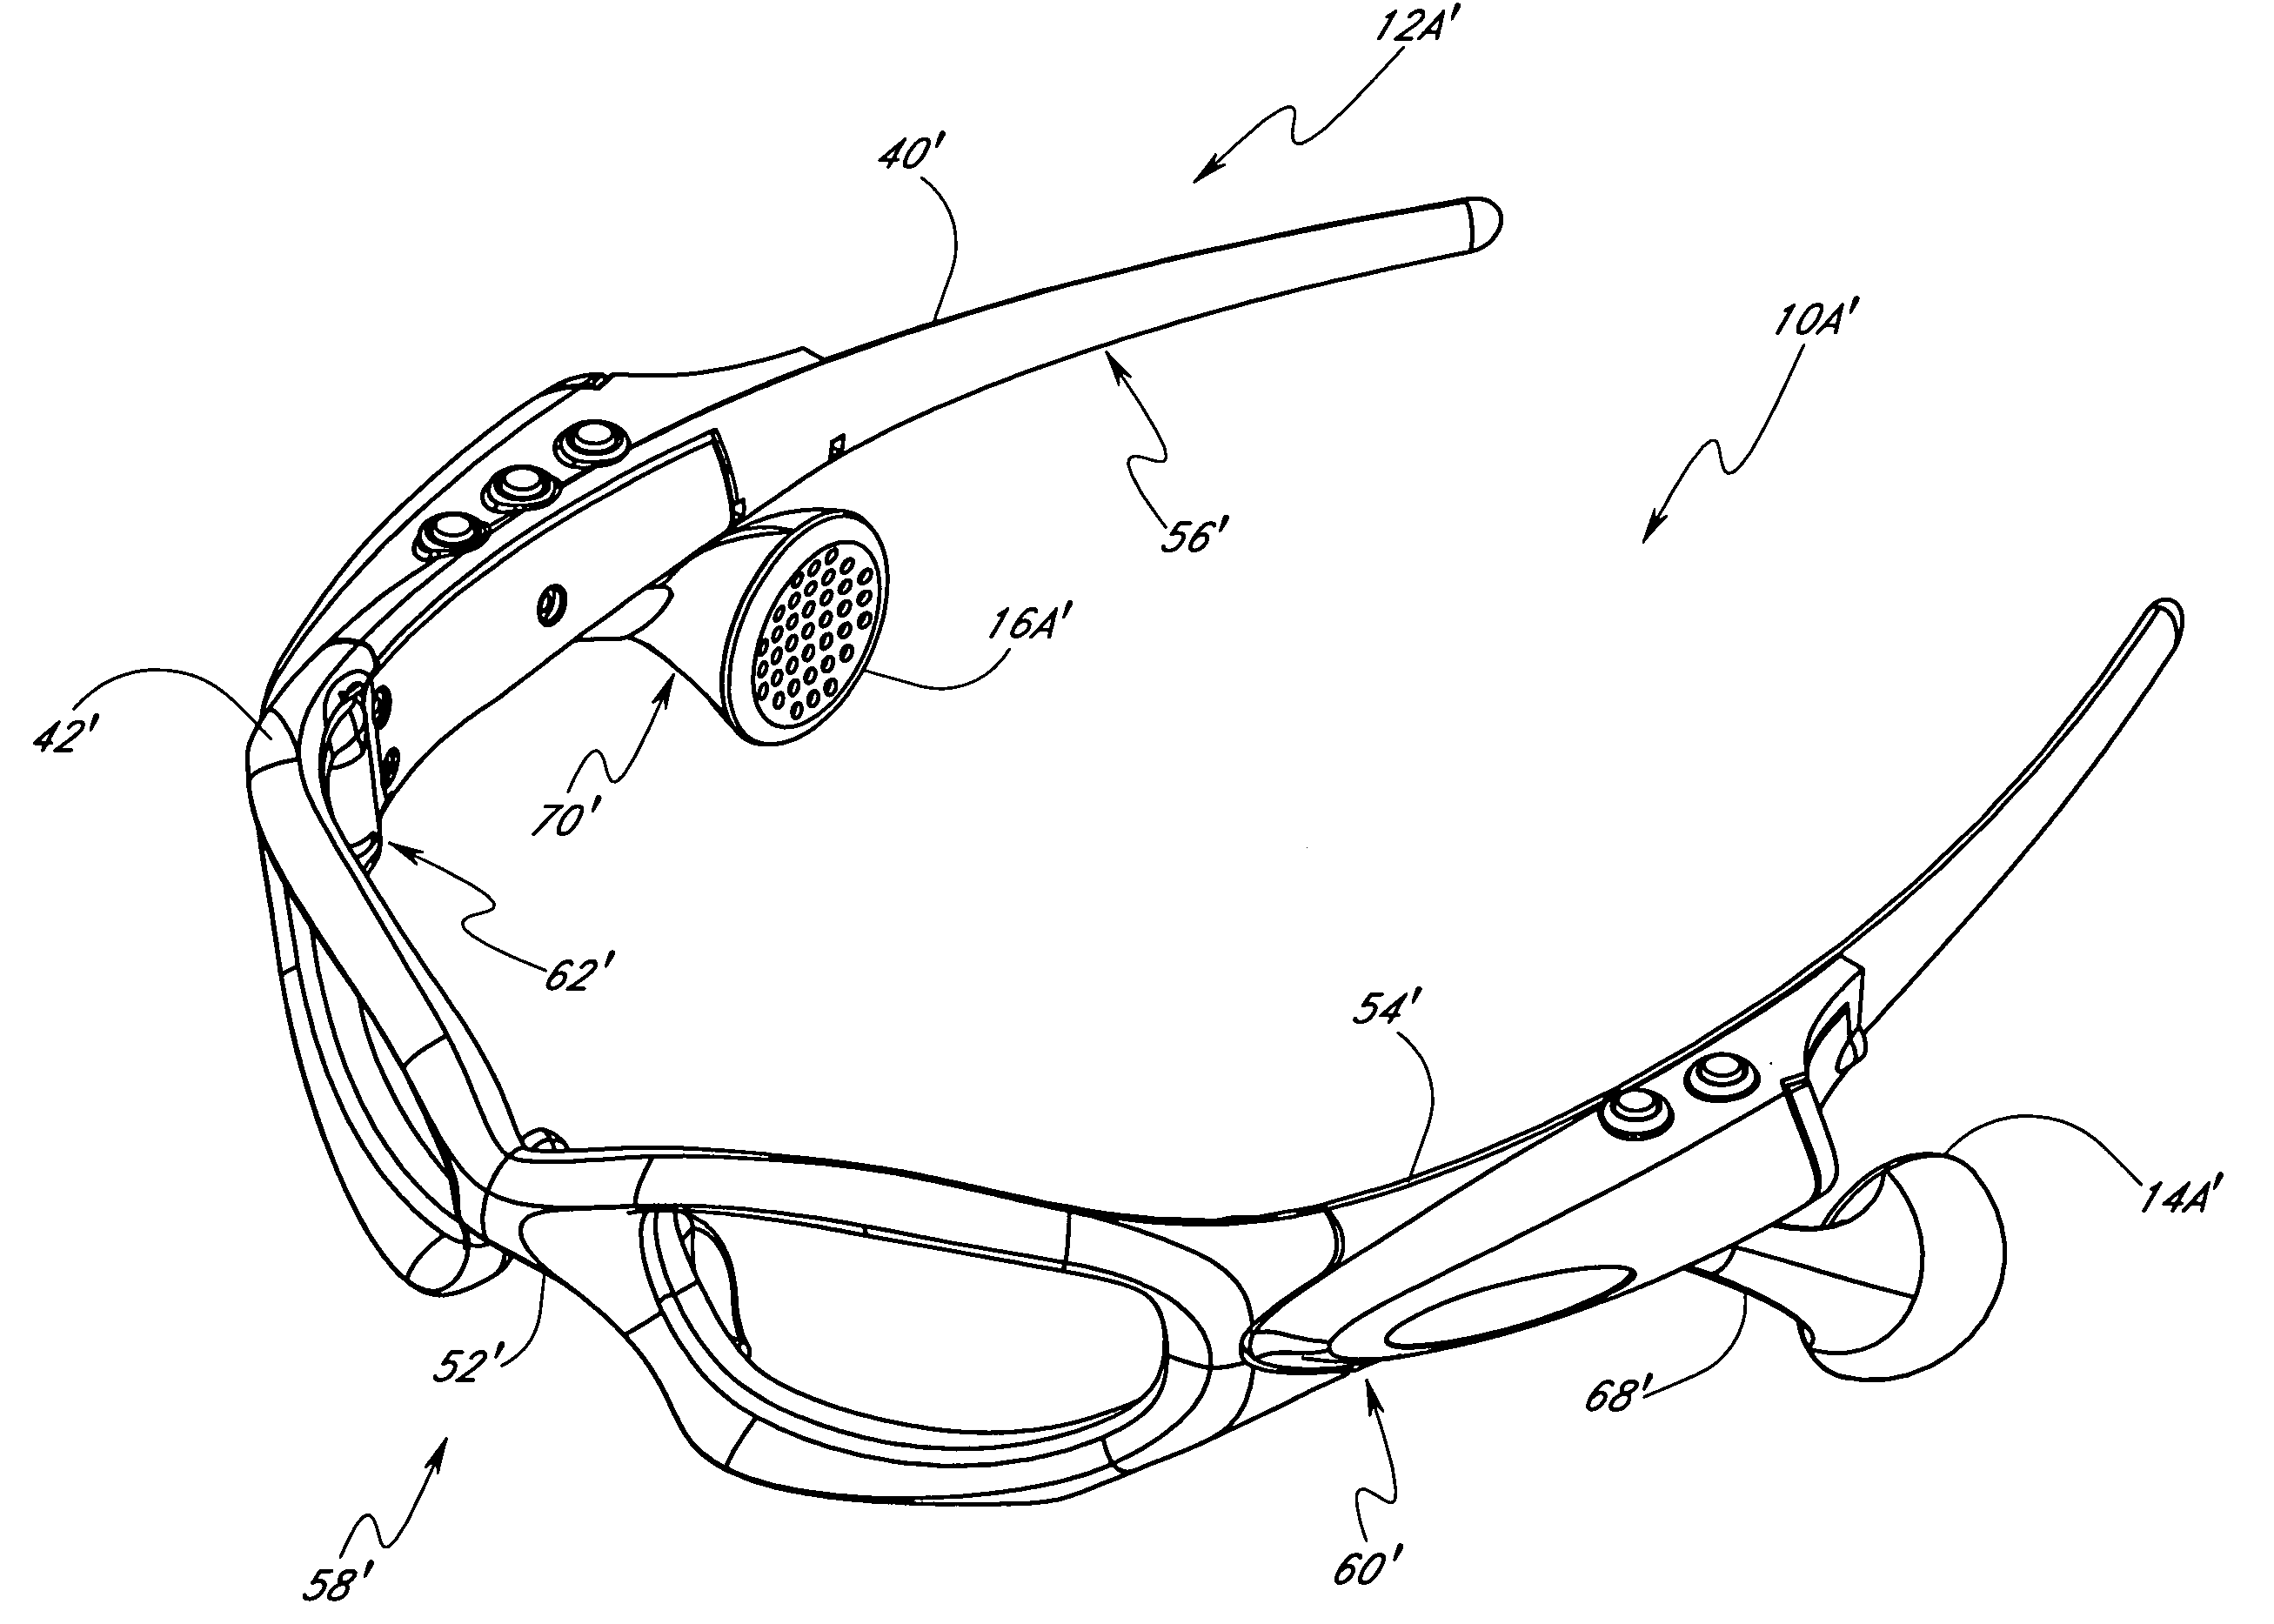 Multi-directional adjustment devices for speaker mounts for eyeglass with MP3 player